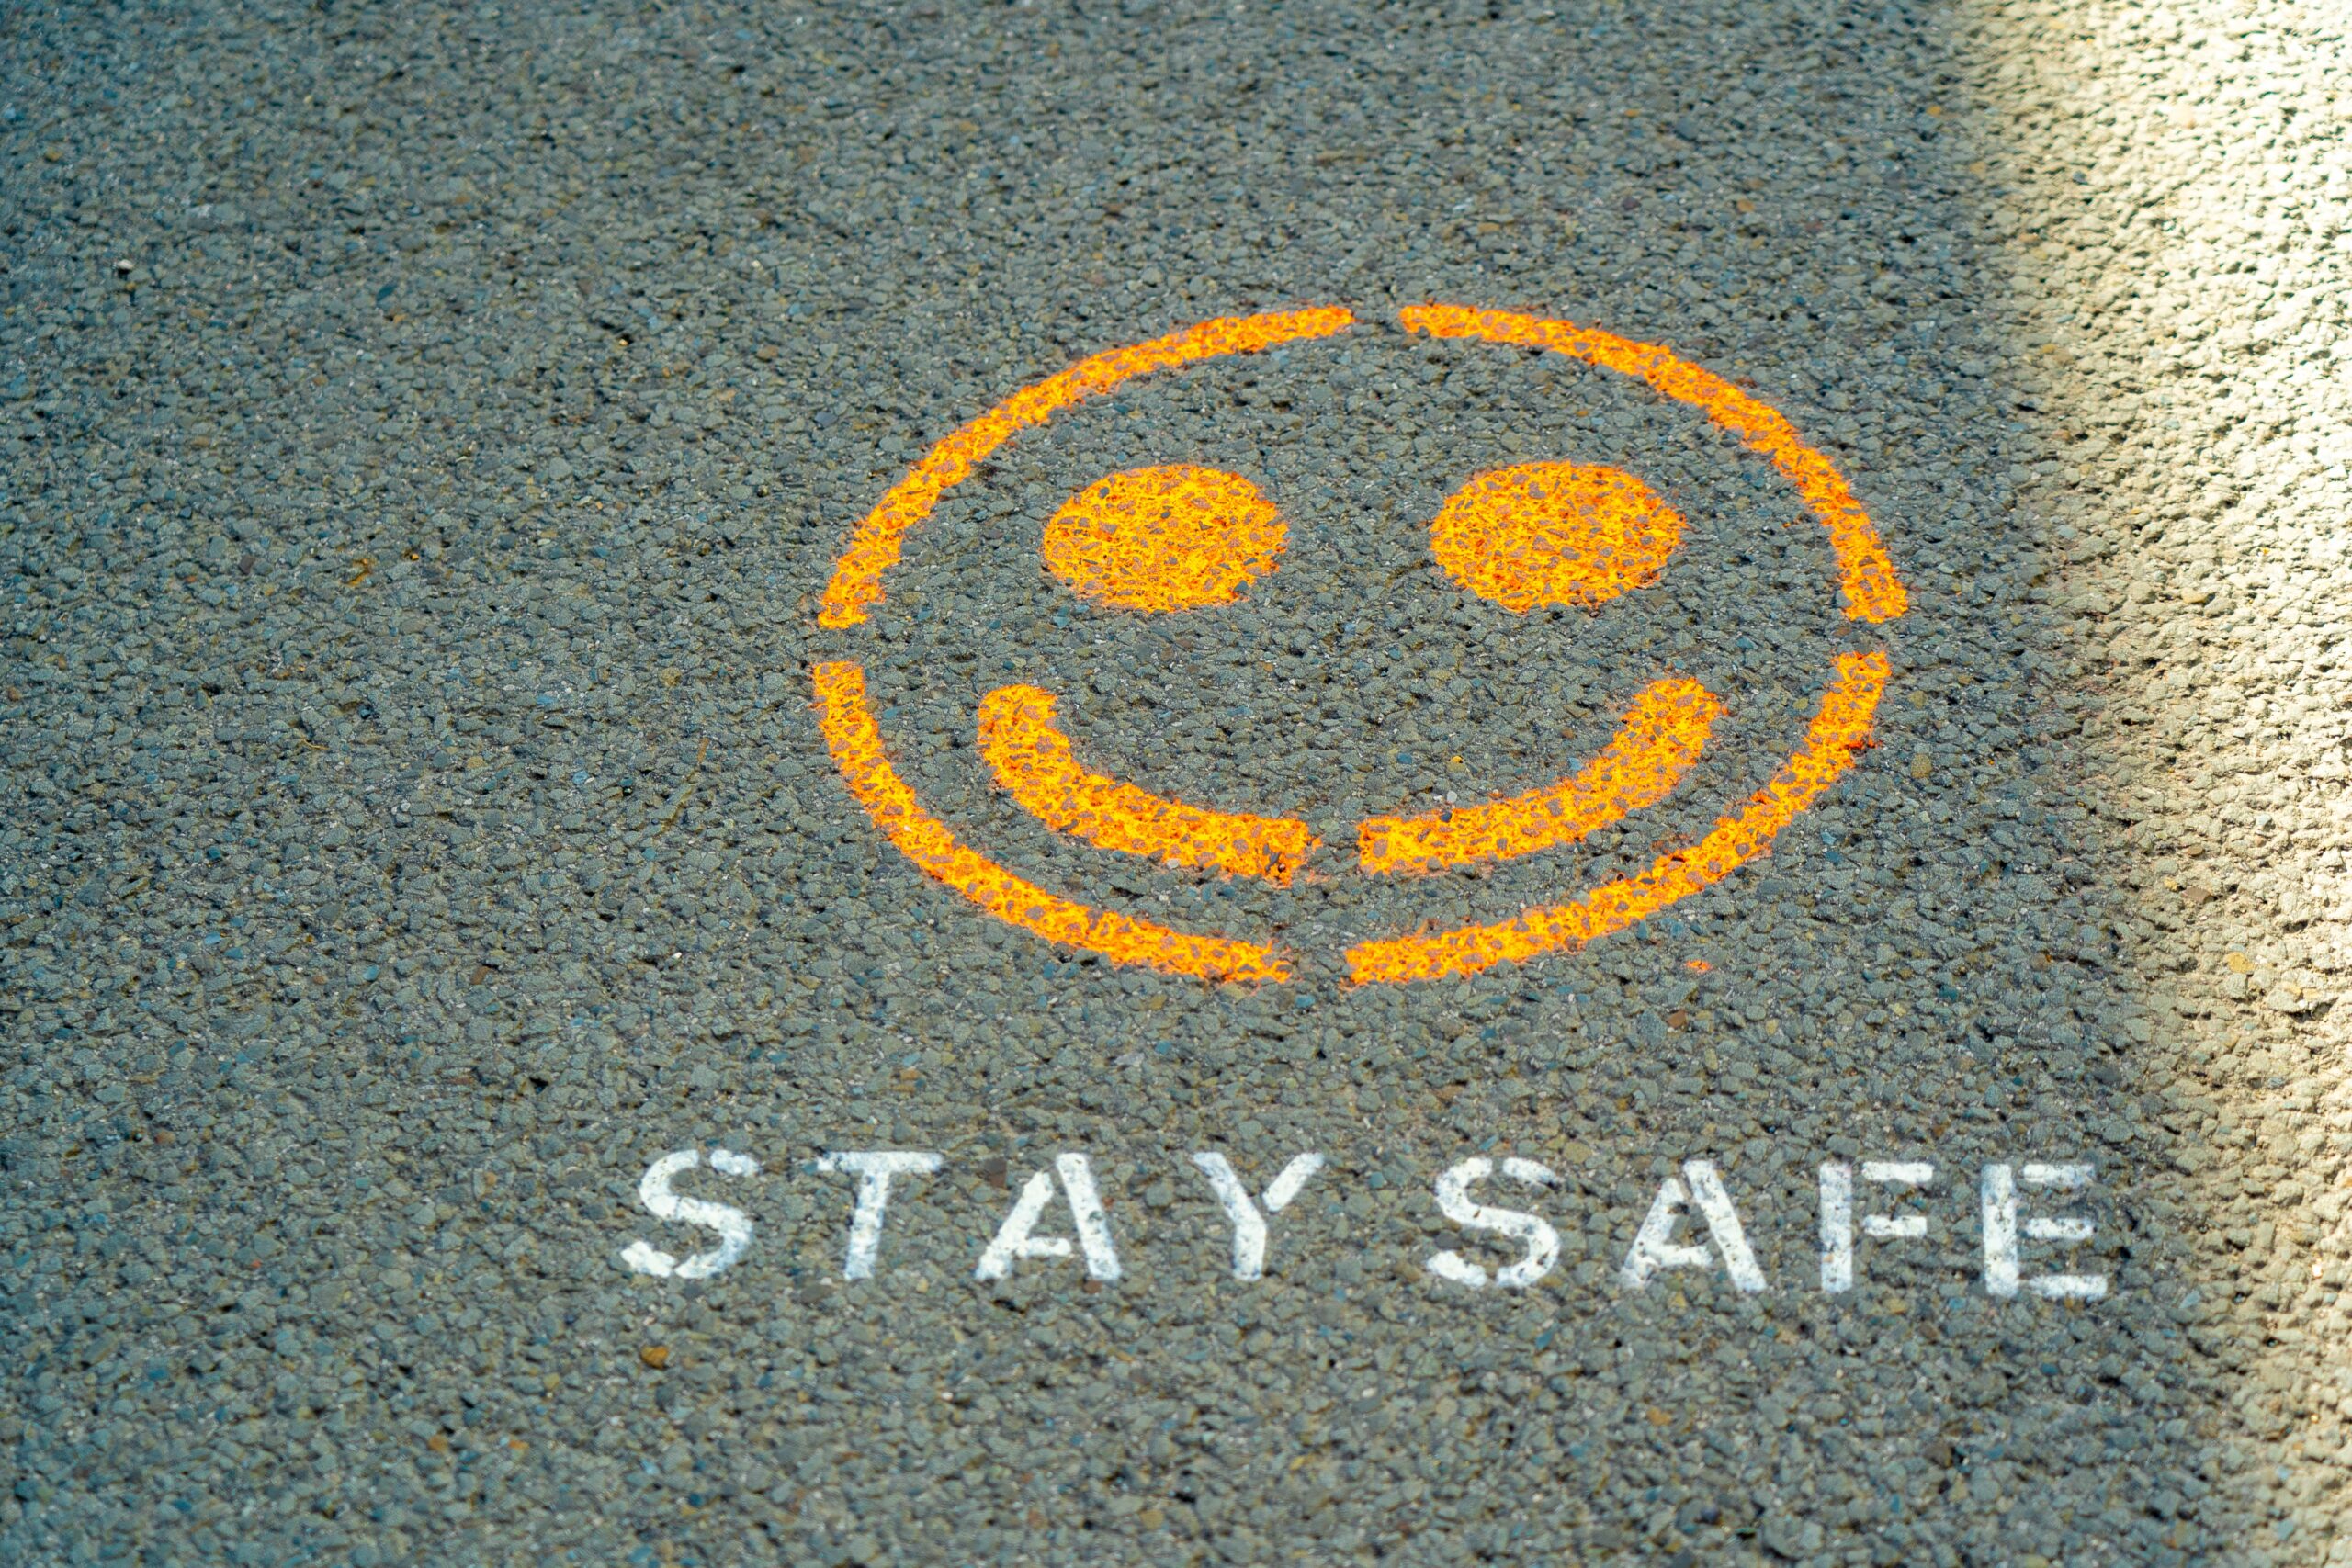 image of a yellow smiley face with white text saying stay safe on the road